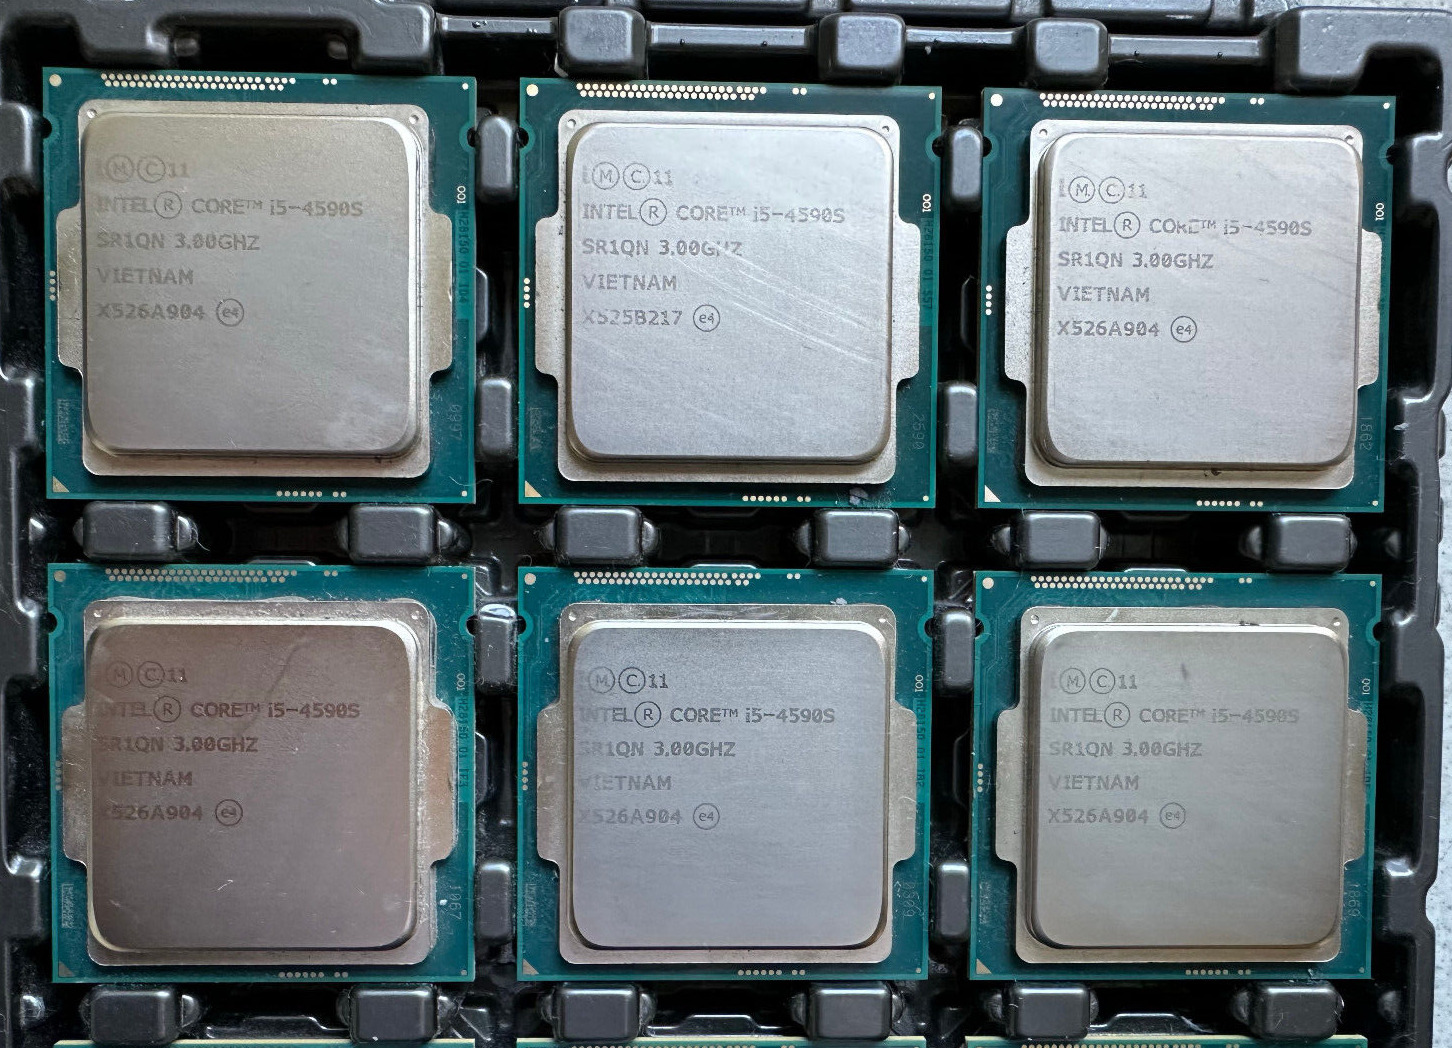 Intel Core i5-4590S CPU @ 3.00GHz (Lot of 6)